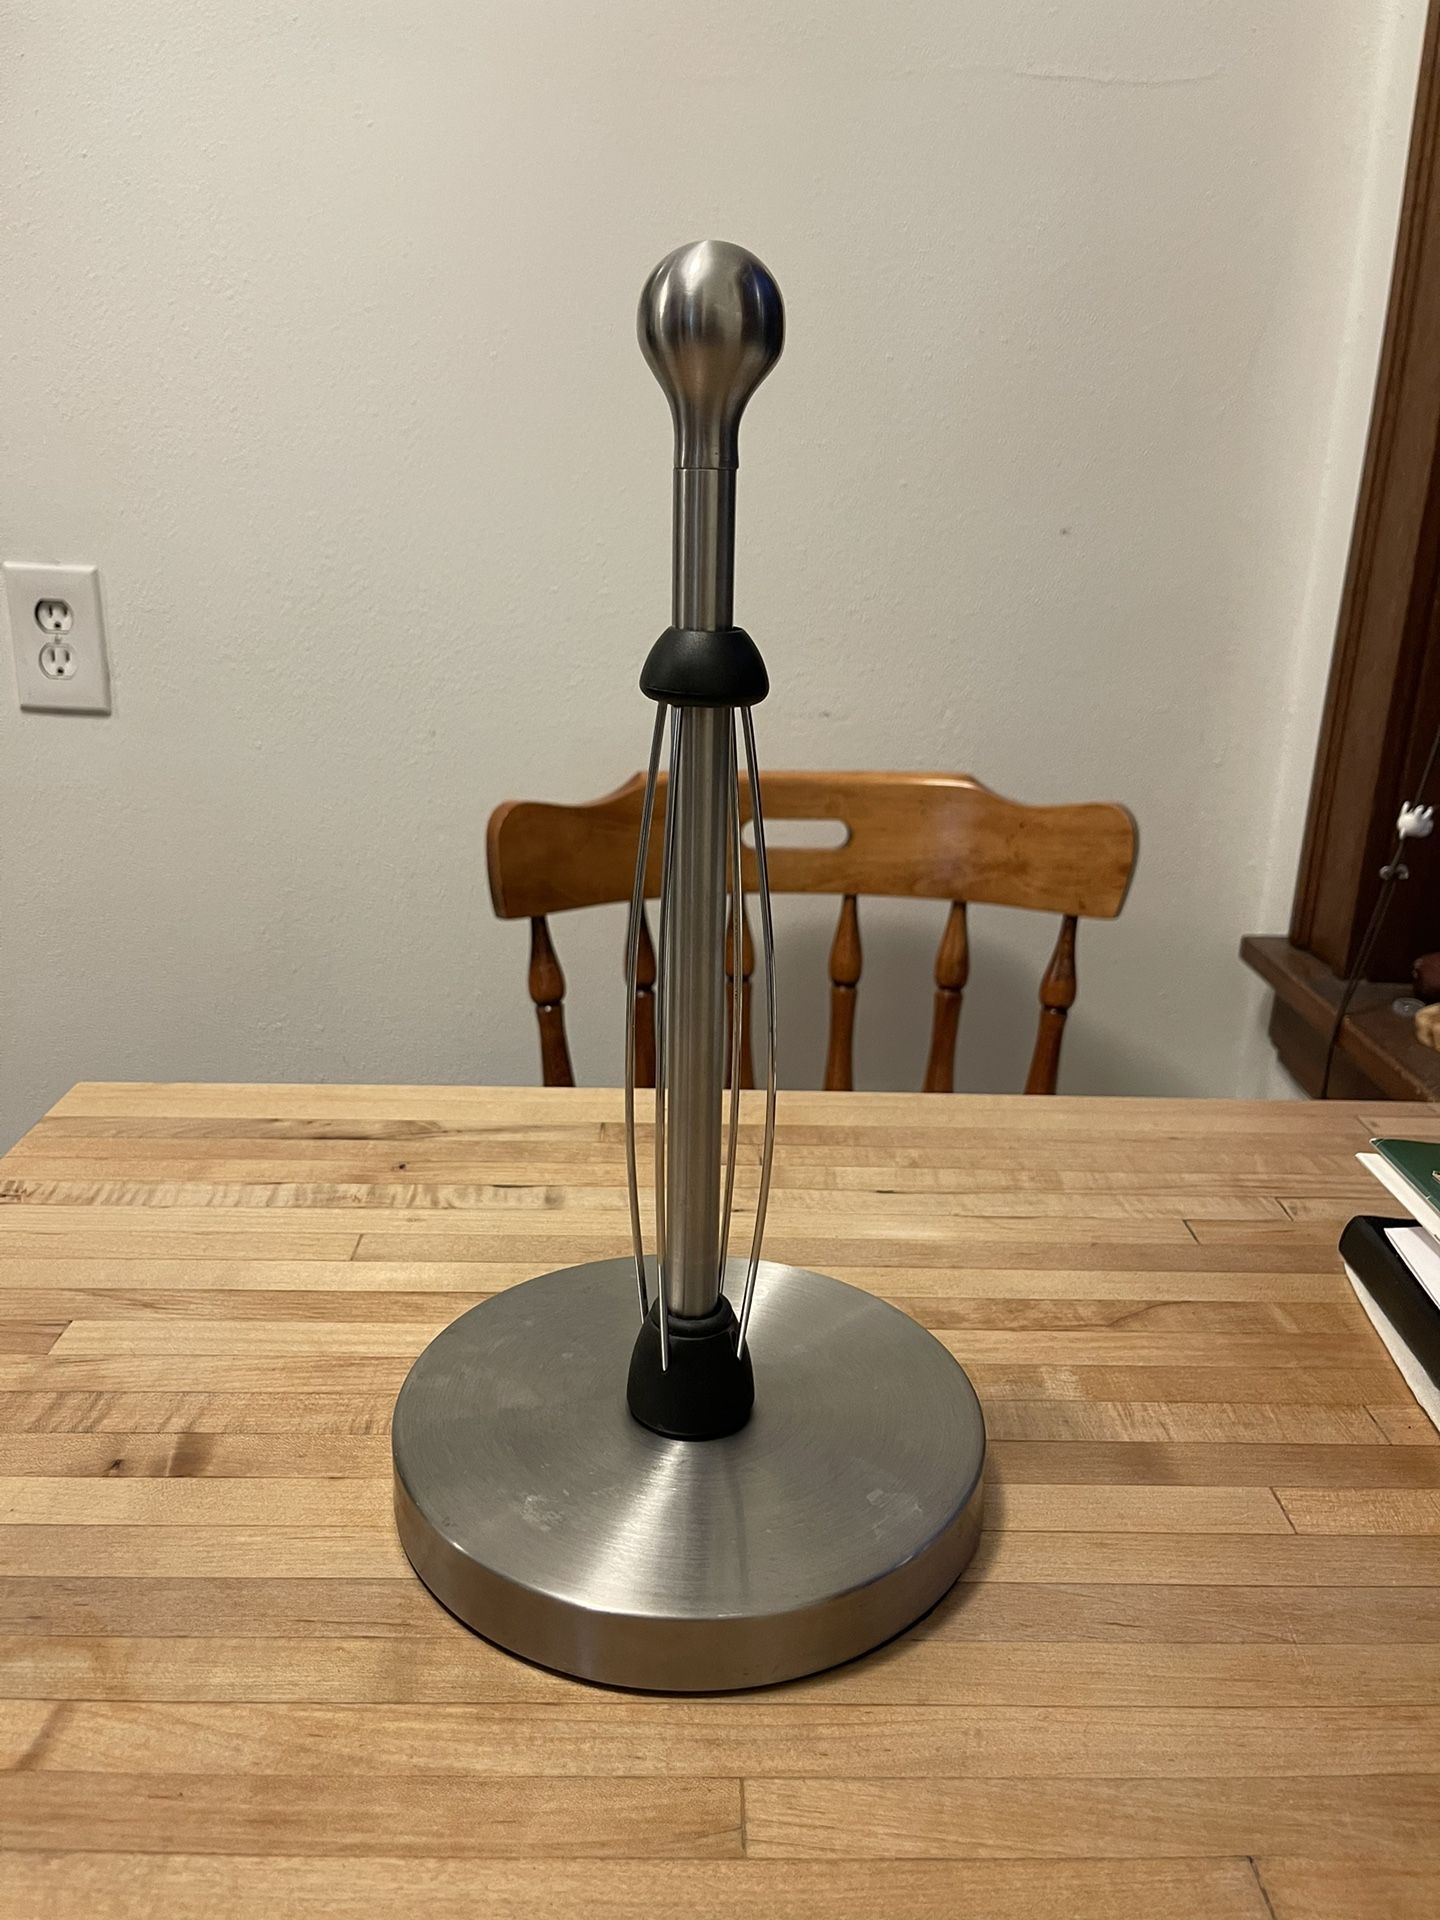 Paper Towel Holder - Weighted Base for Sale in Seattle, WA - OfferUp